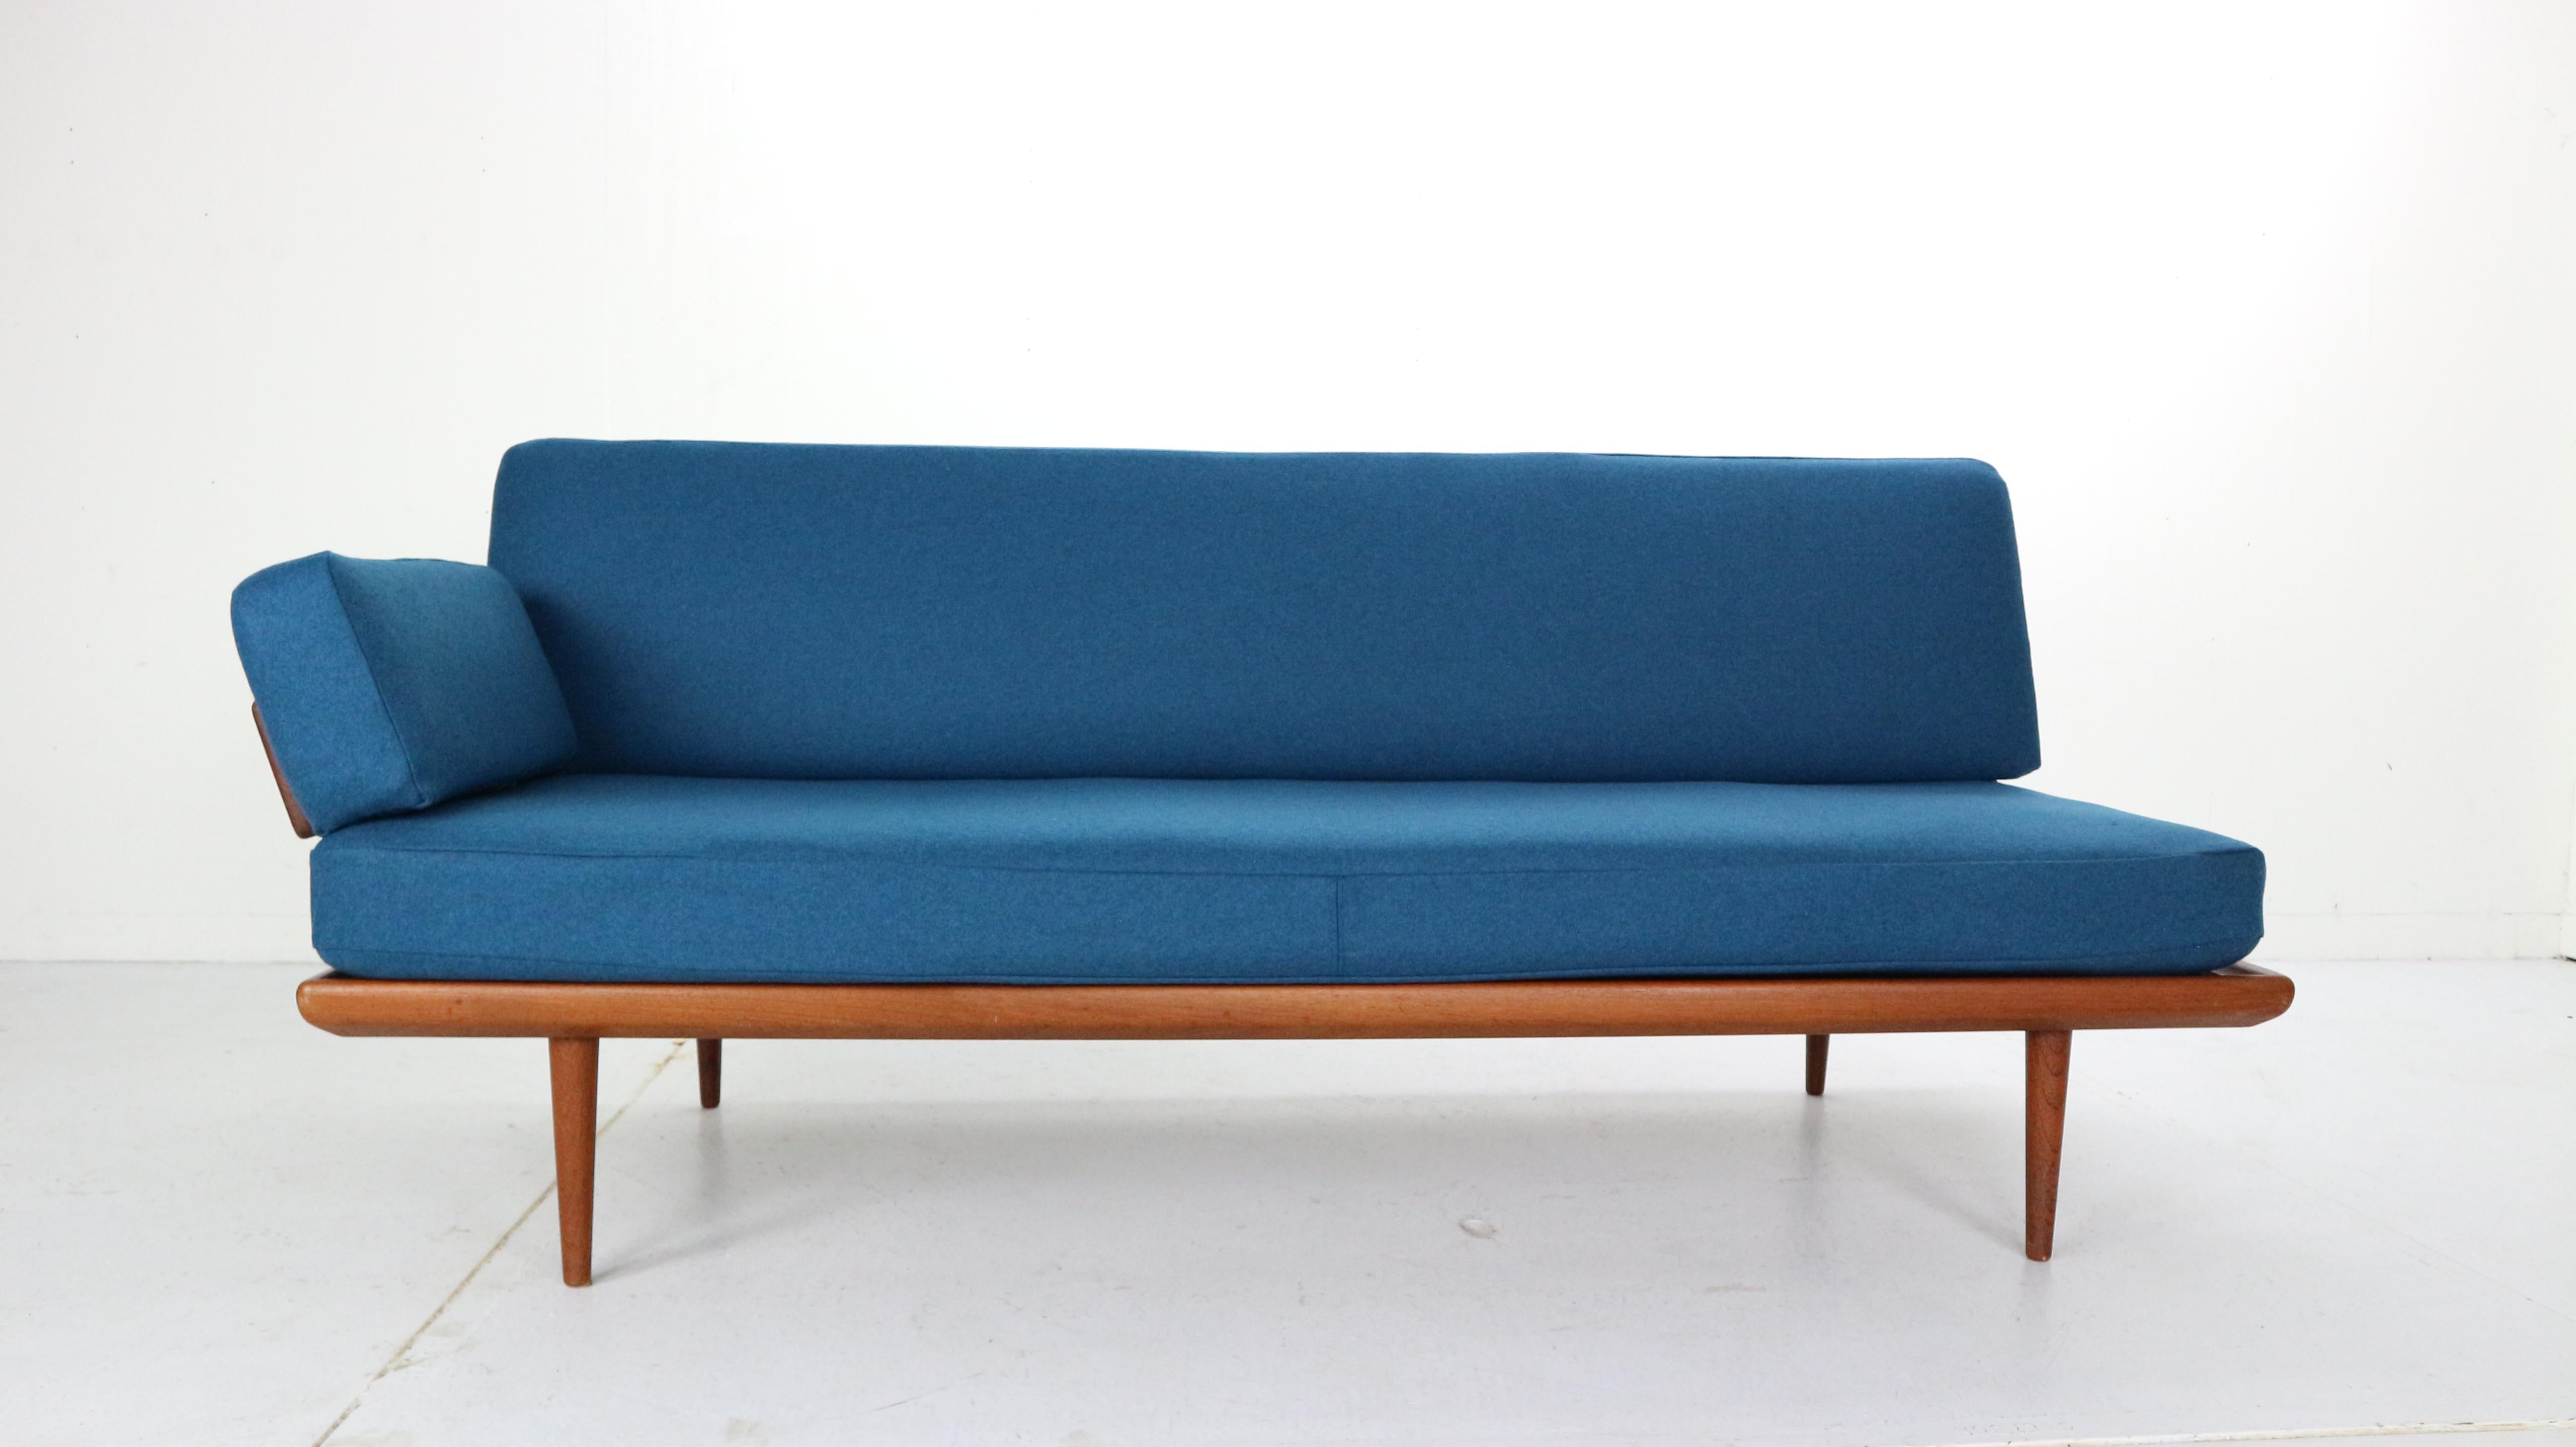 Beautiful Danish design set.
Three-seat and two-seat sofa or daybed and corner side table, designed by Peter Hvidt and Orla Mølgaard Nielsen and manufactured by France & Søn in 1950s, Denmark

Model of sofas- Minerva & coffee table-